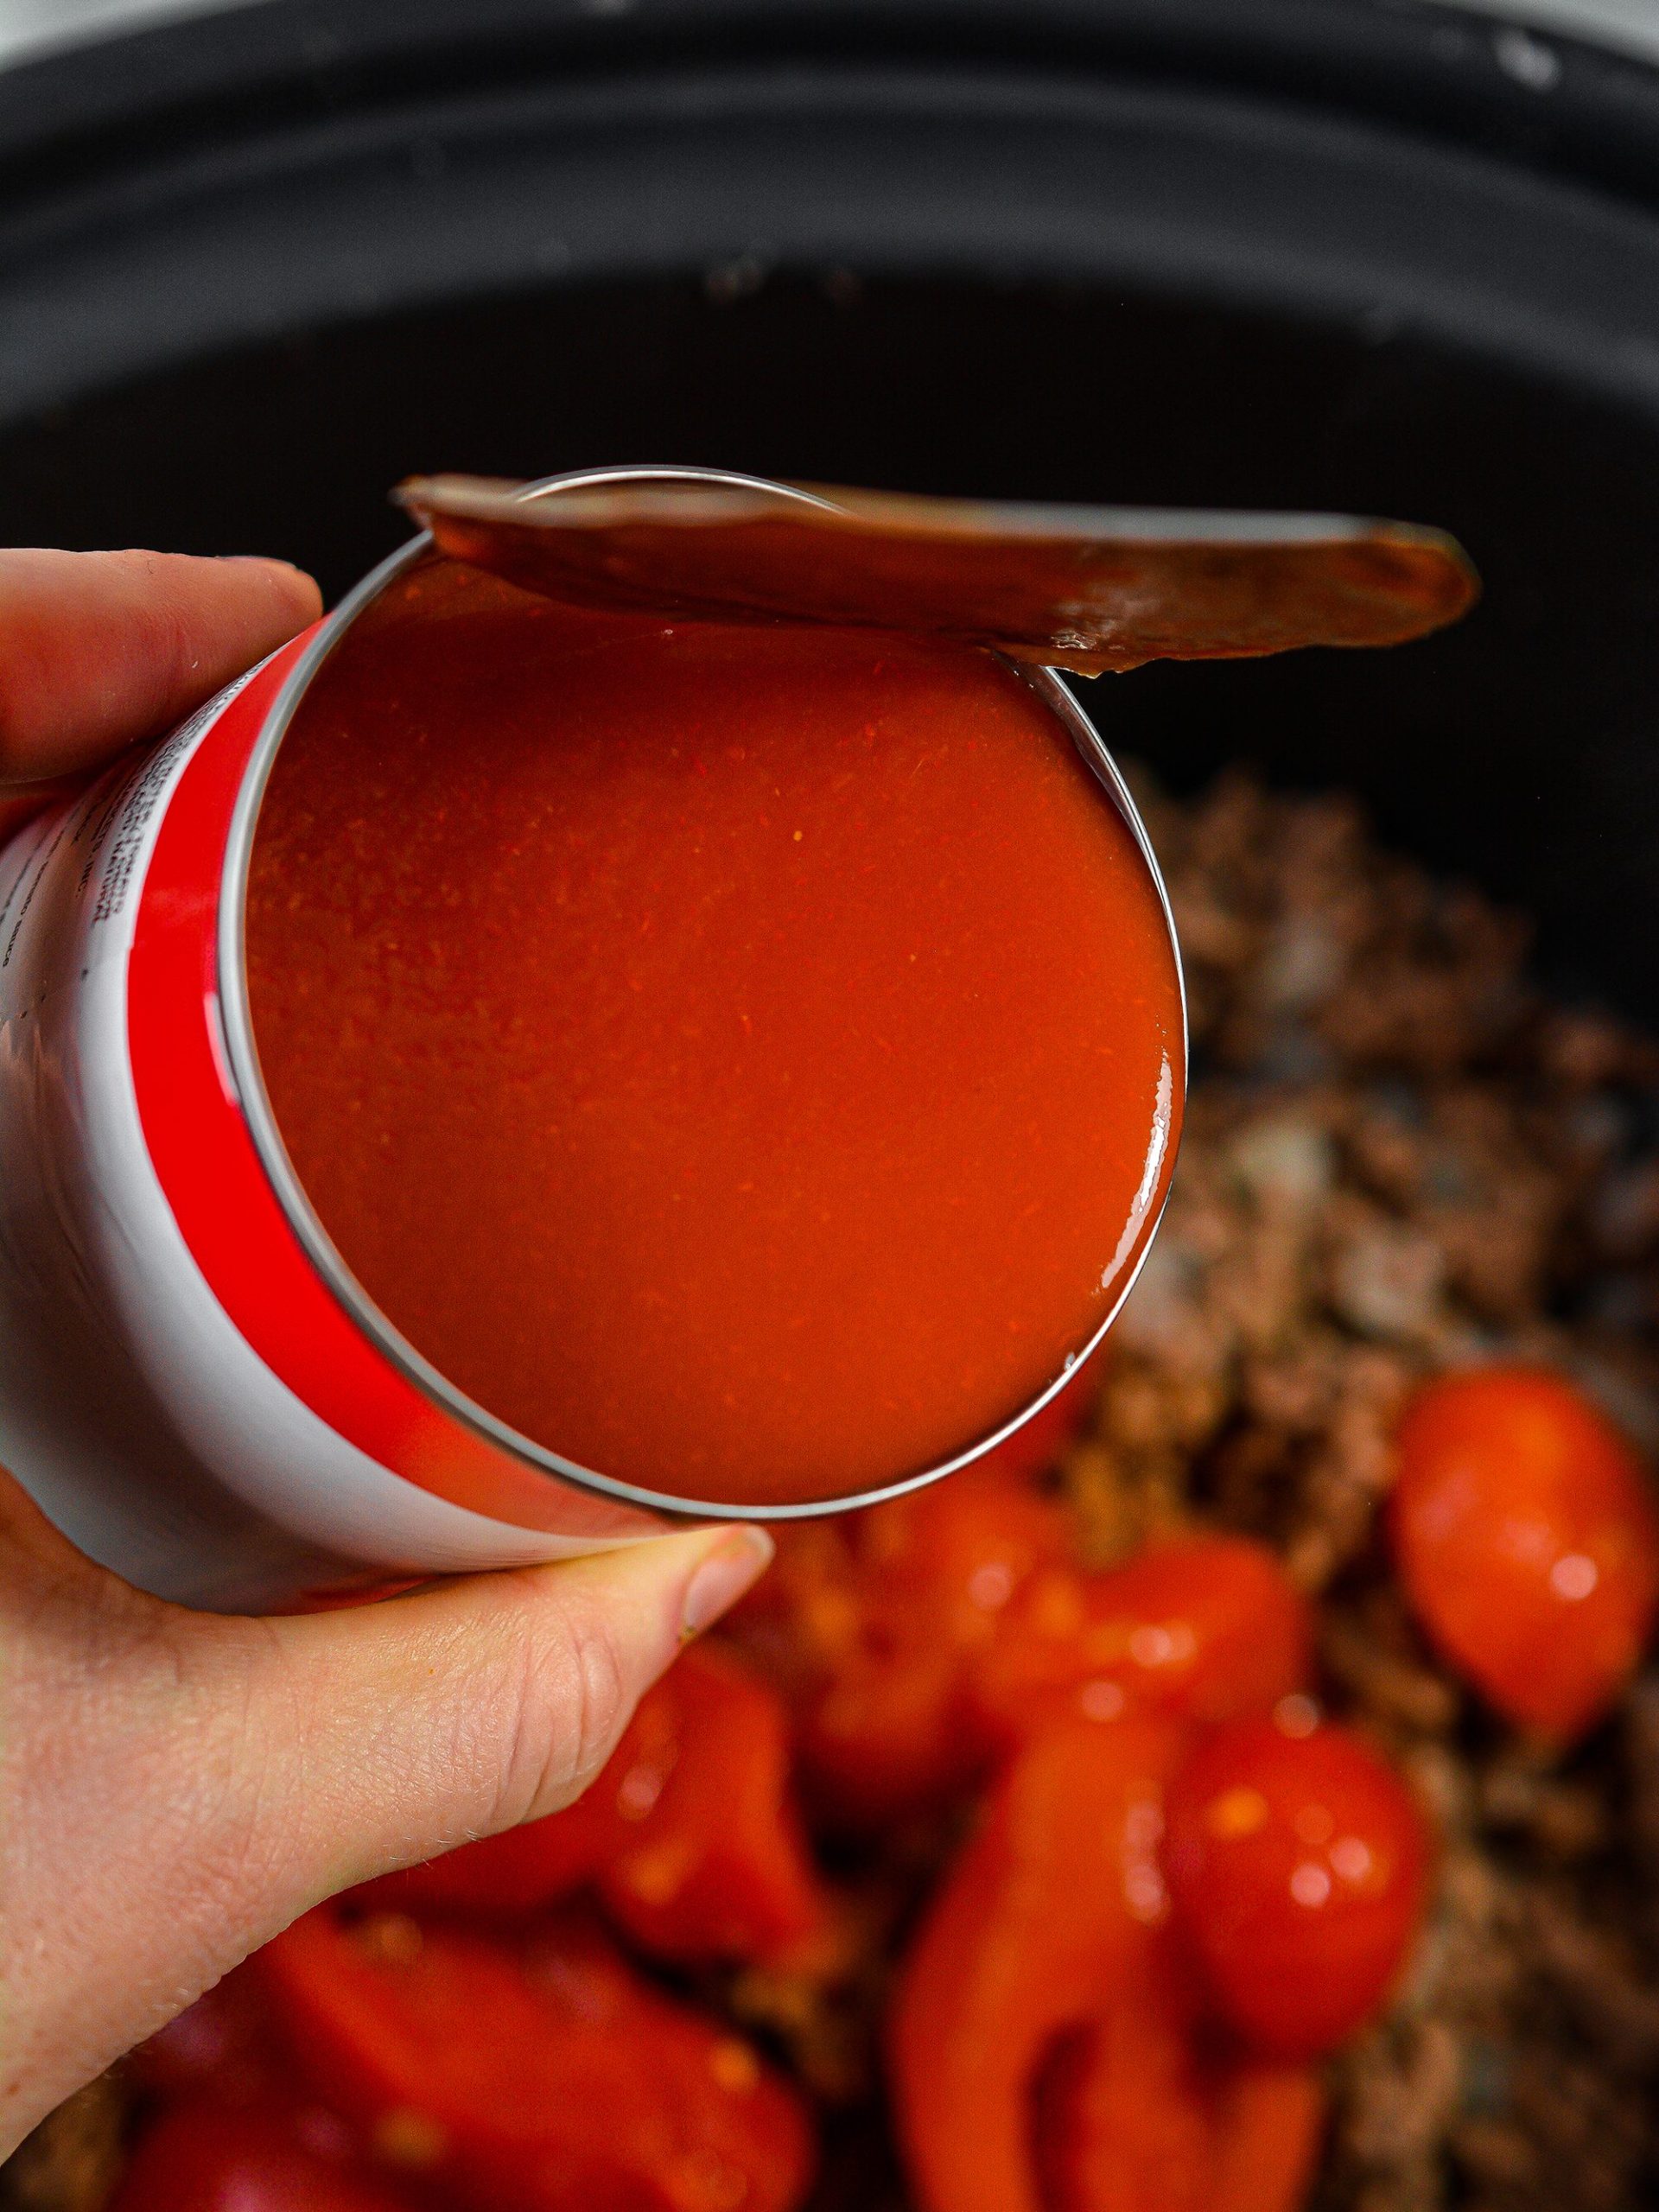 add a 15 oz can of tomato sauce.